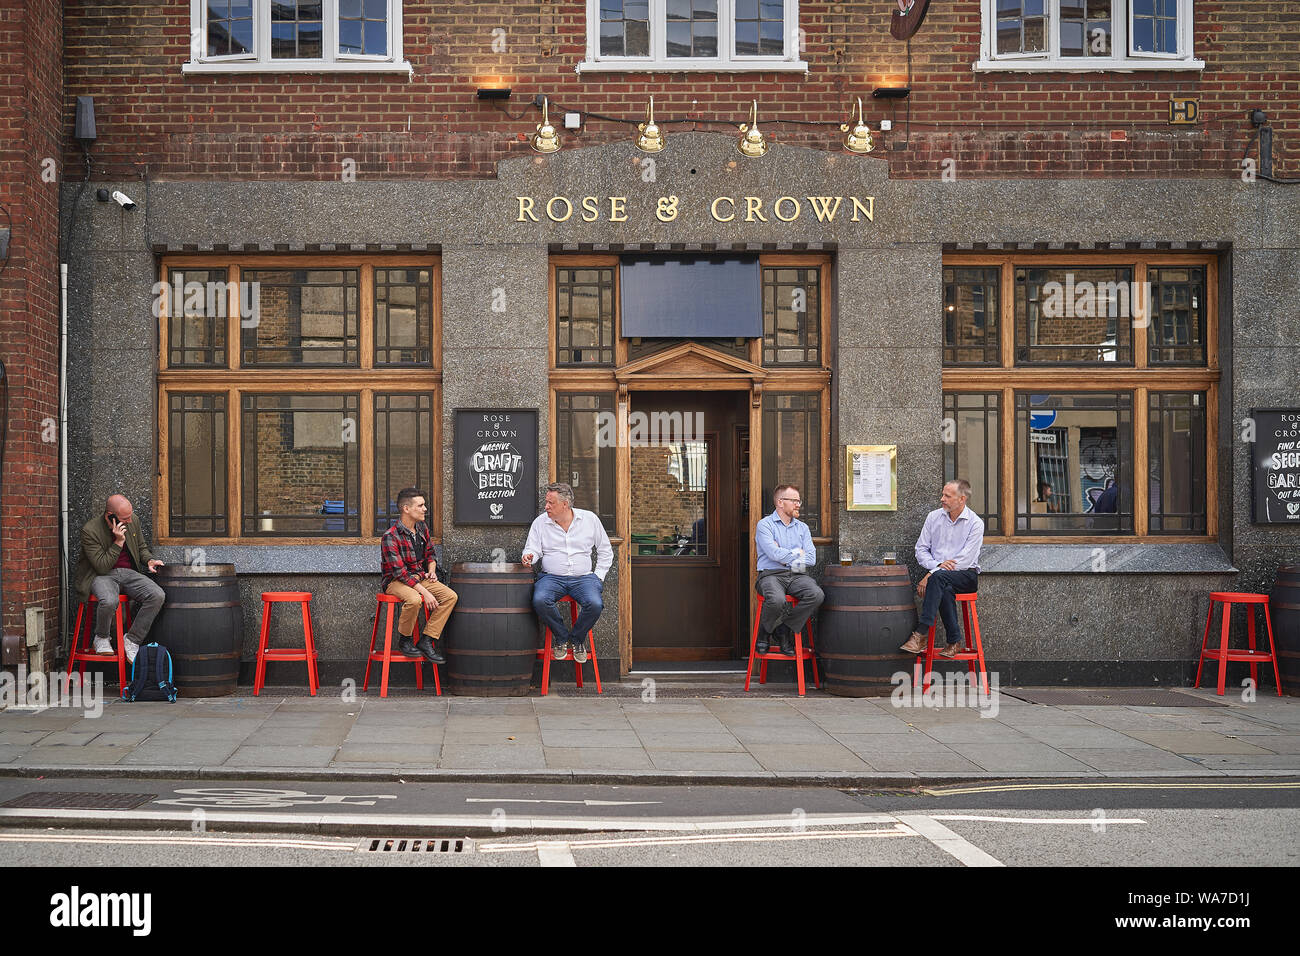 London, UK - August, 2019. People having drinks outside a pub in central London. Stock Photo